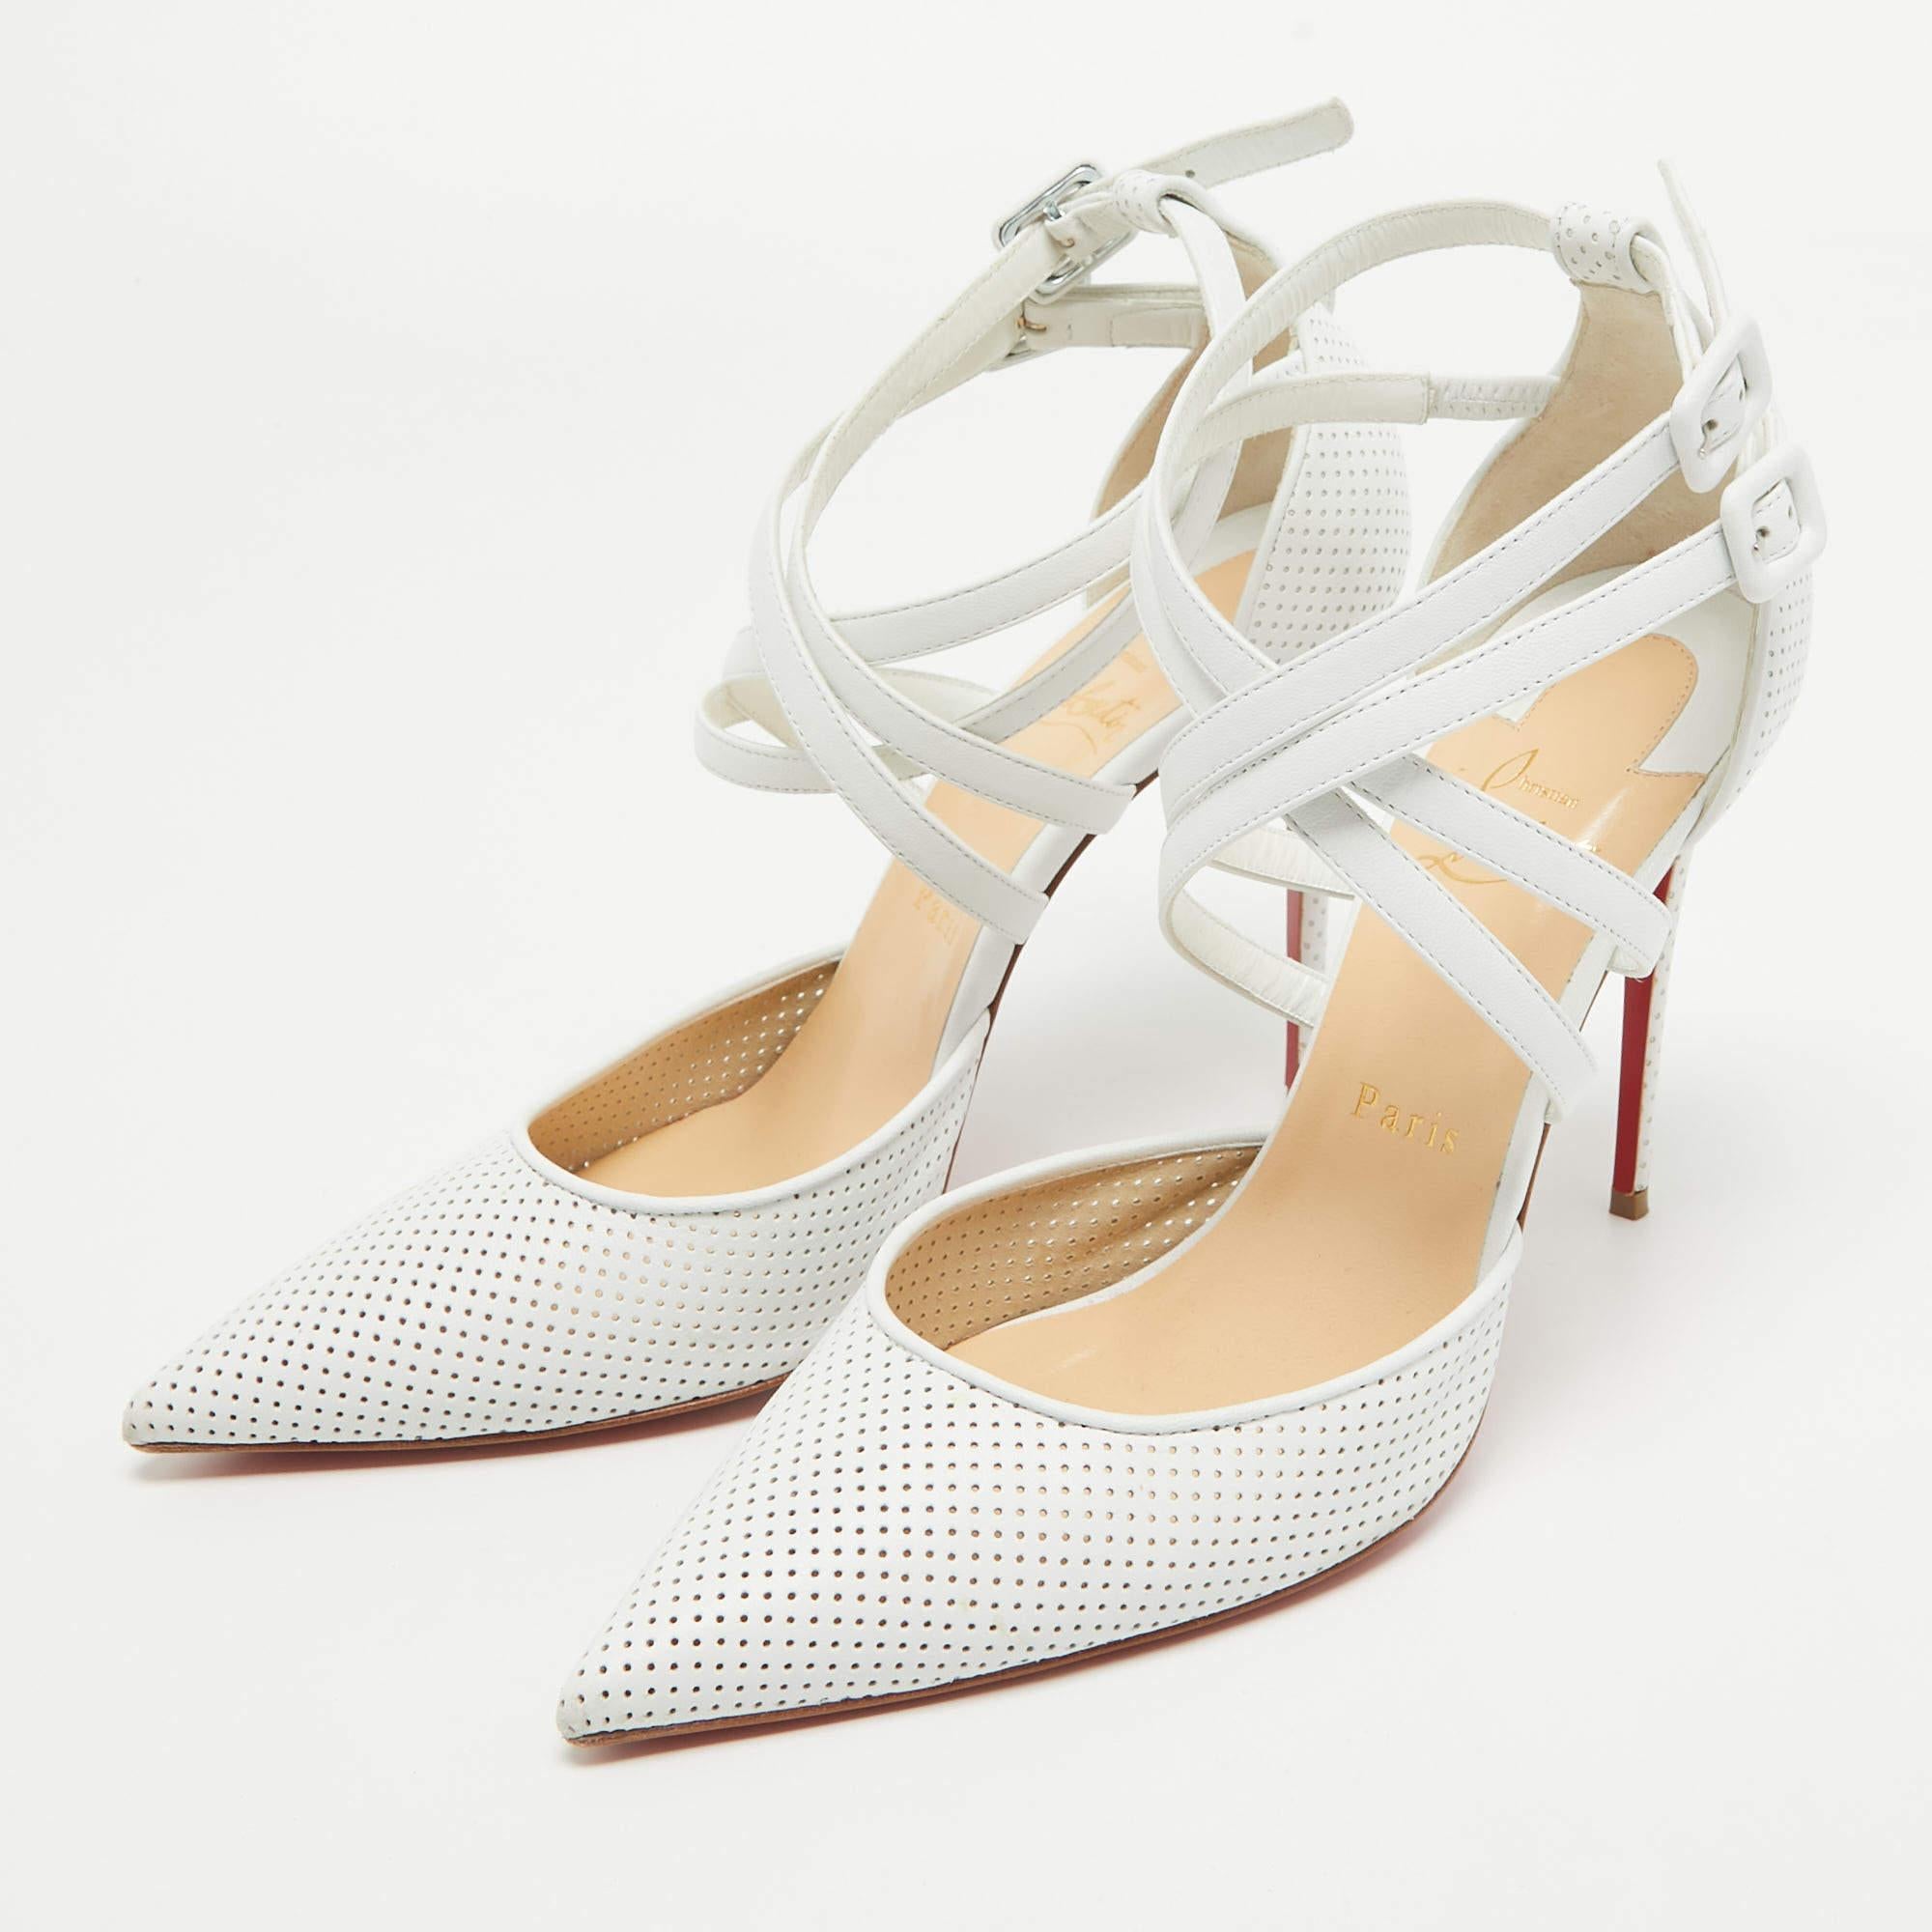 Christian Louboutin White Perforated Leather Victororilla Pumps Size 39.5 For Sale 3